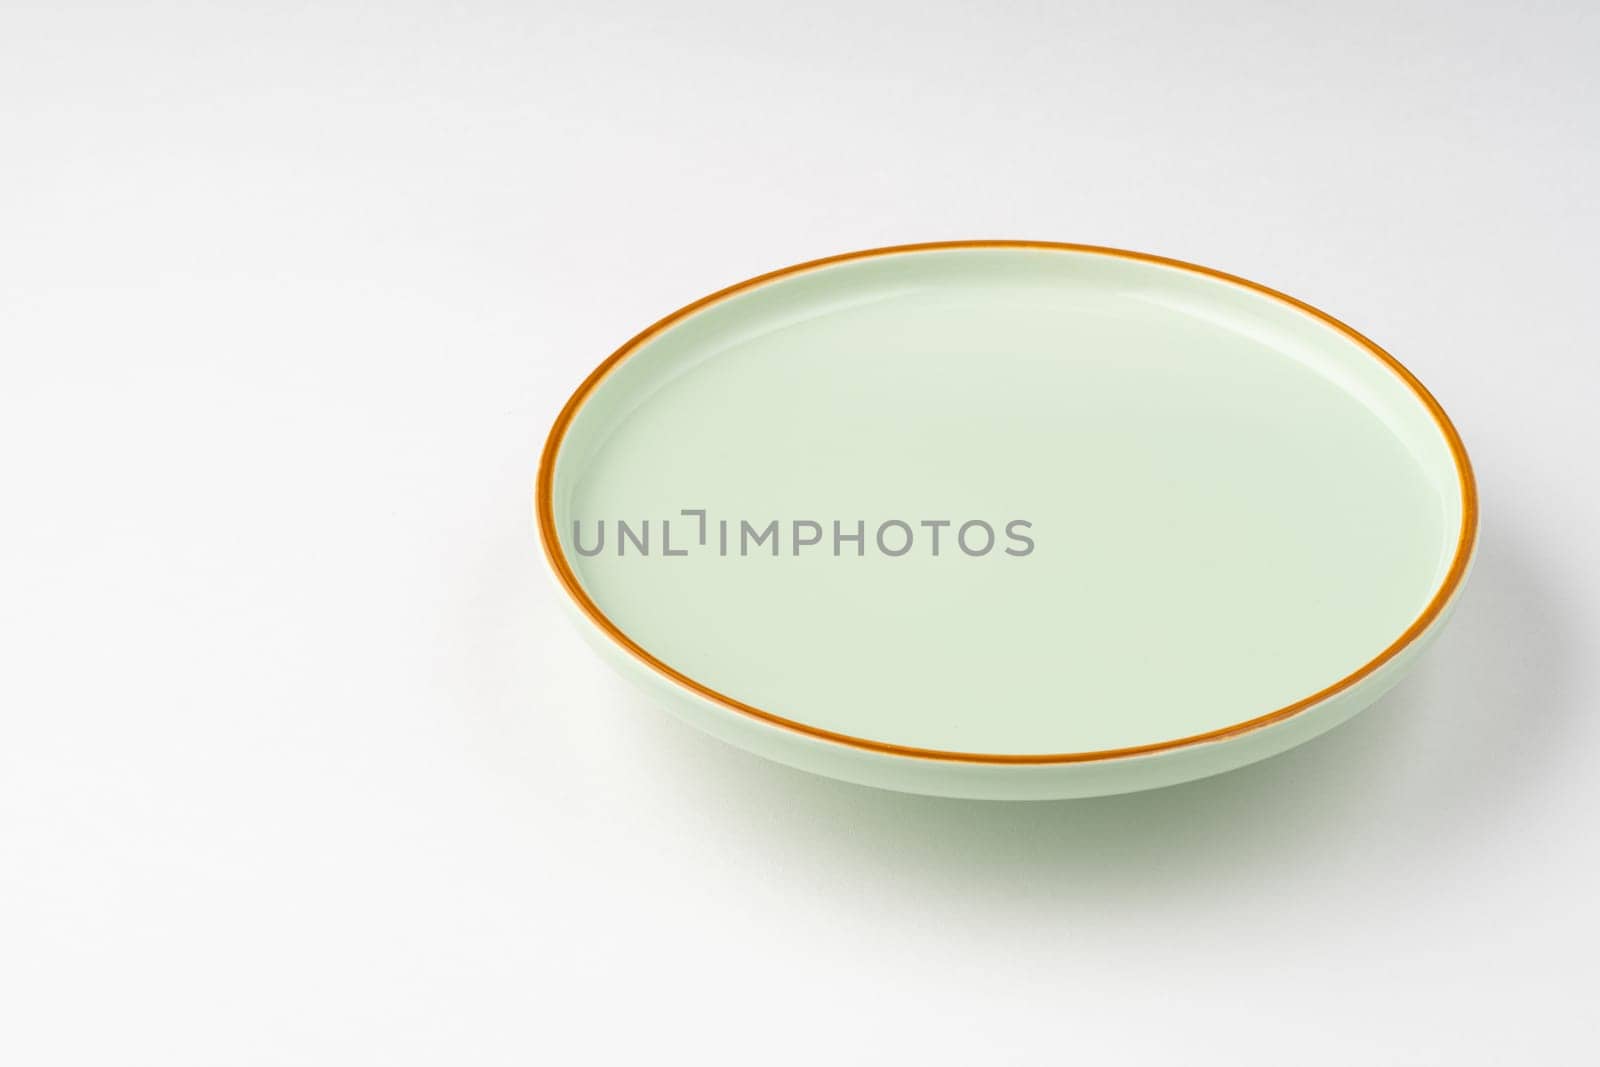 The pastel green ceramic plate with orange outlines on a white background by A_Karim